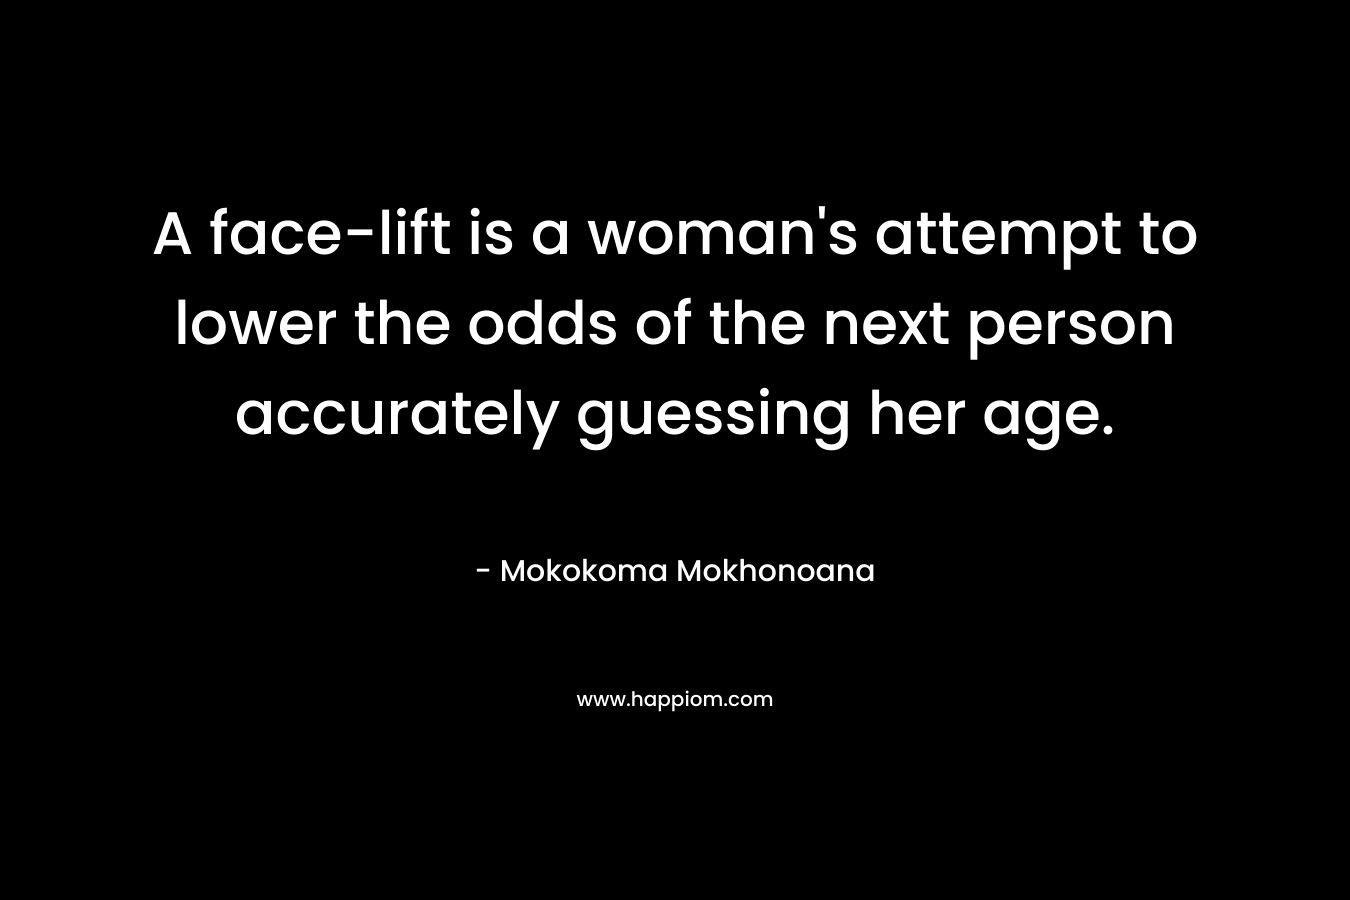 A face-lift is a woman’s attempt to lower the odds of the next person accurately guessing her age. – Mokokoma Mokhonoana